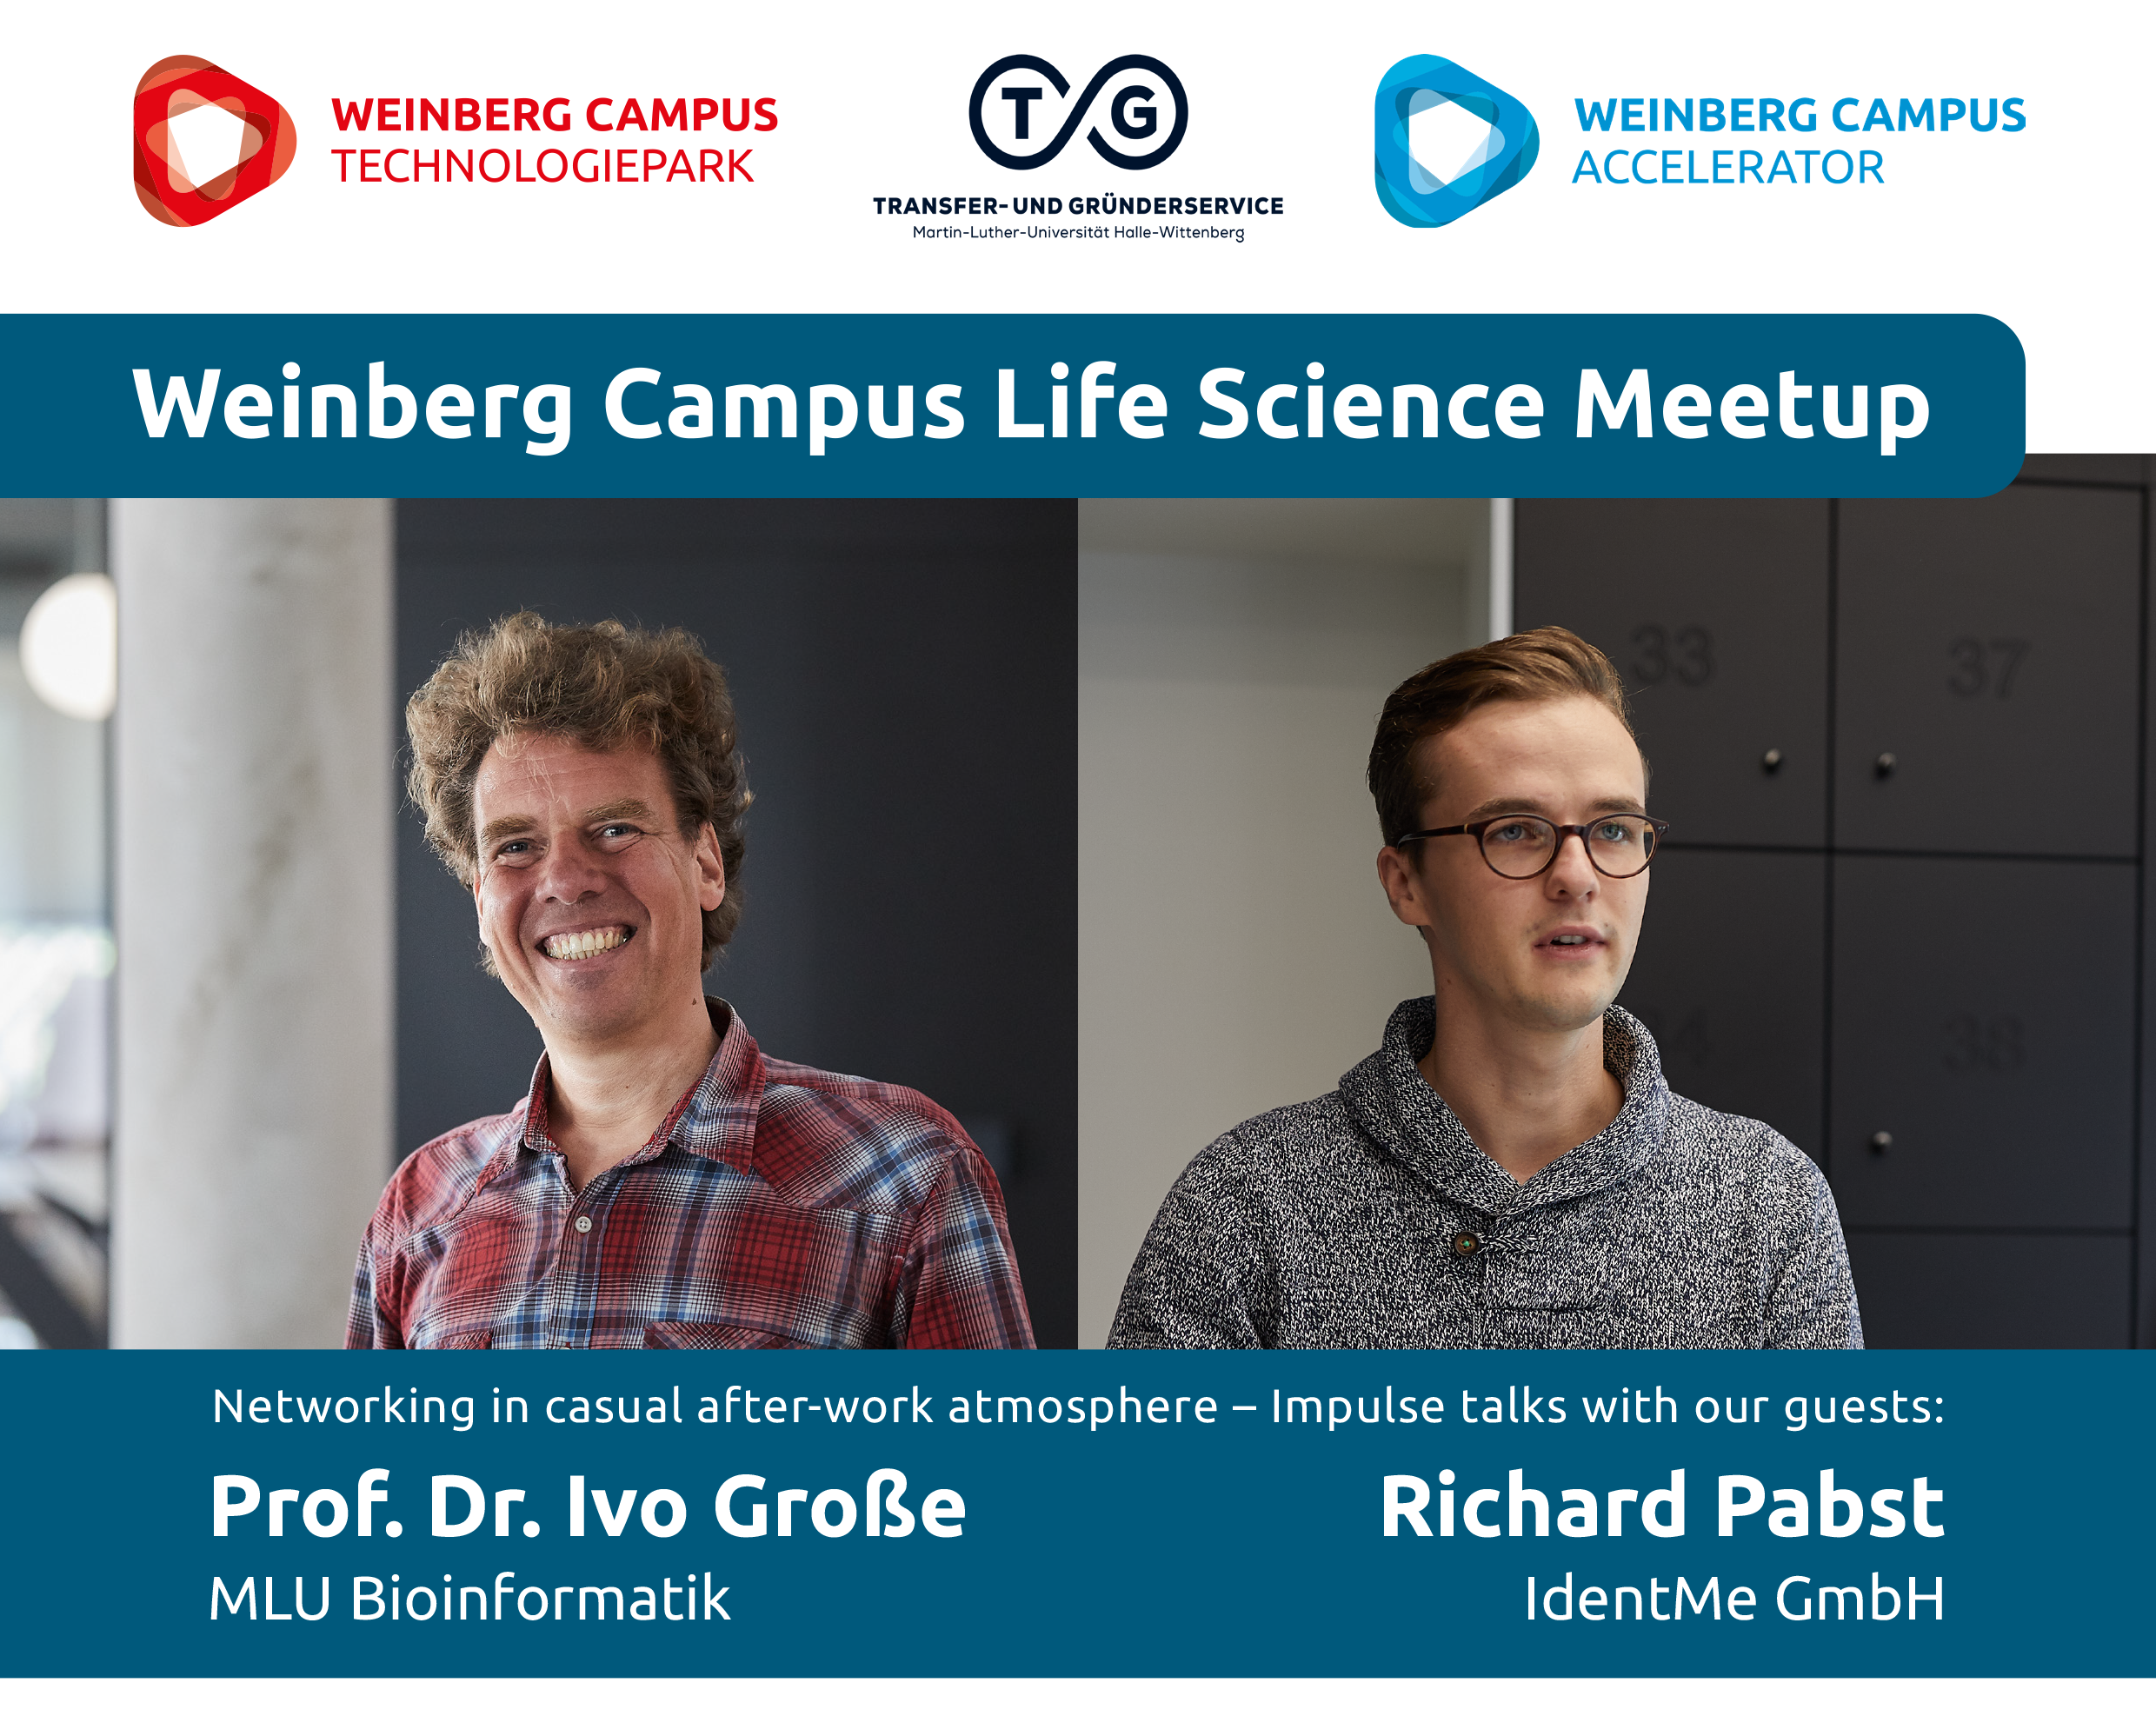 Weinberg Campus Life Science Meetup